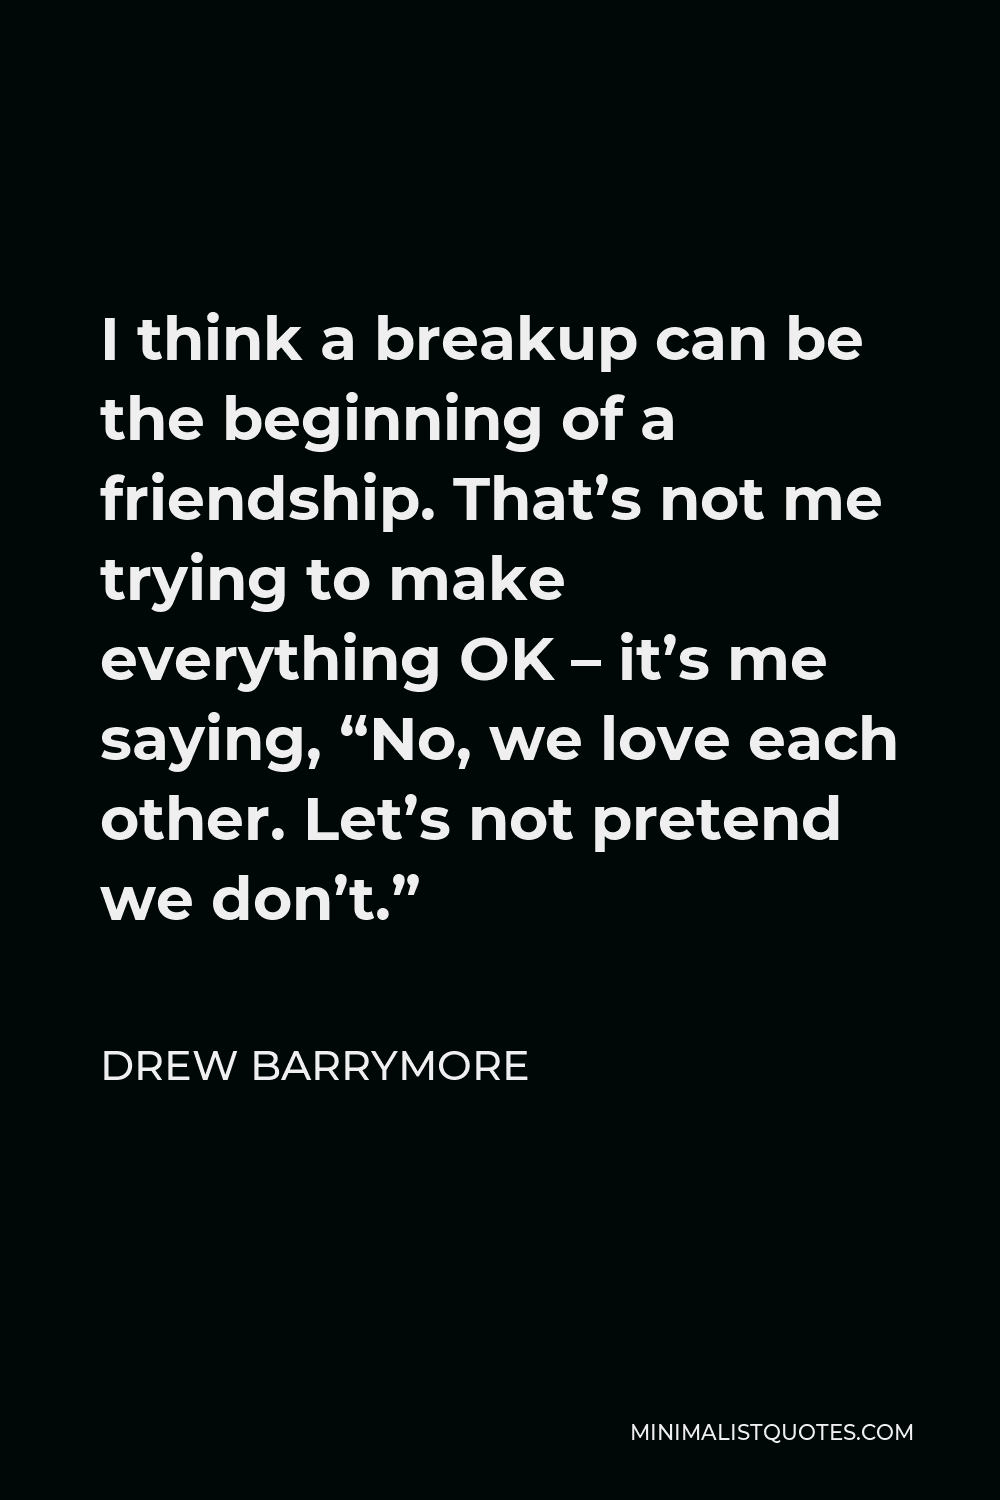 Drew Barrymore Quote - I think a breakup can be the beginning of a friendship. That’s not me trying to make everything OK – it’s me saying, “No, we love each other. Let’s not pretend we don’t.”